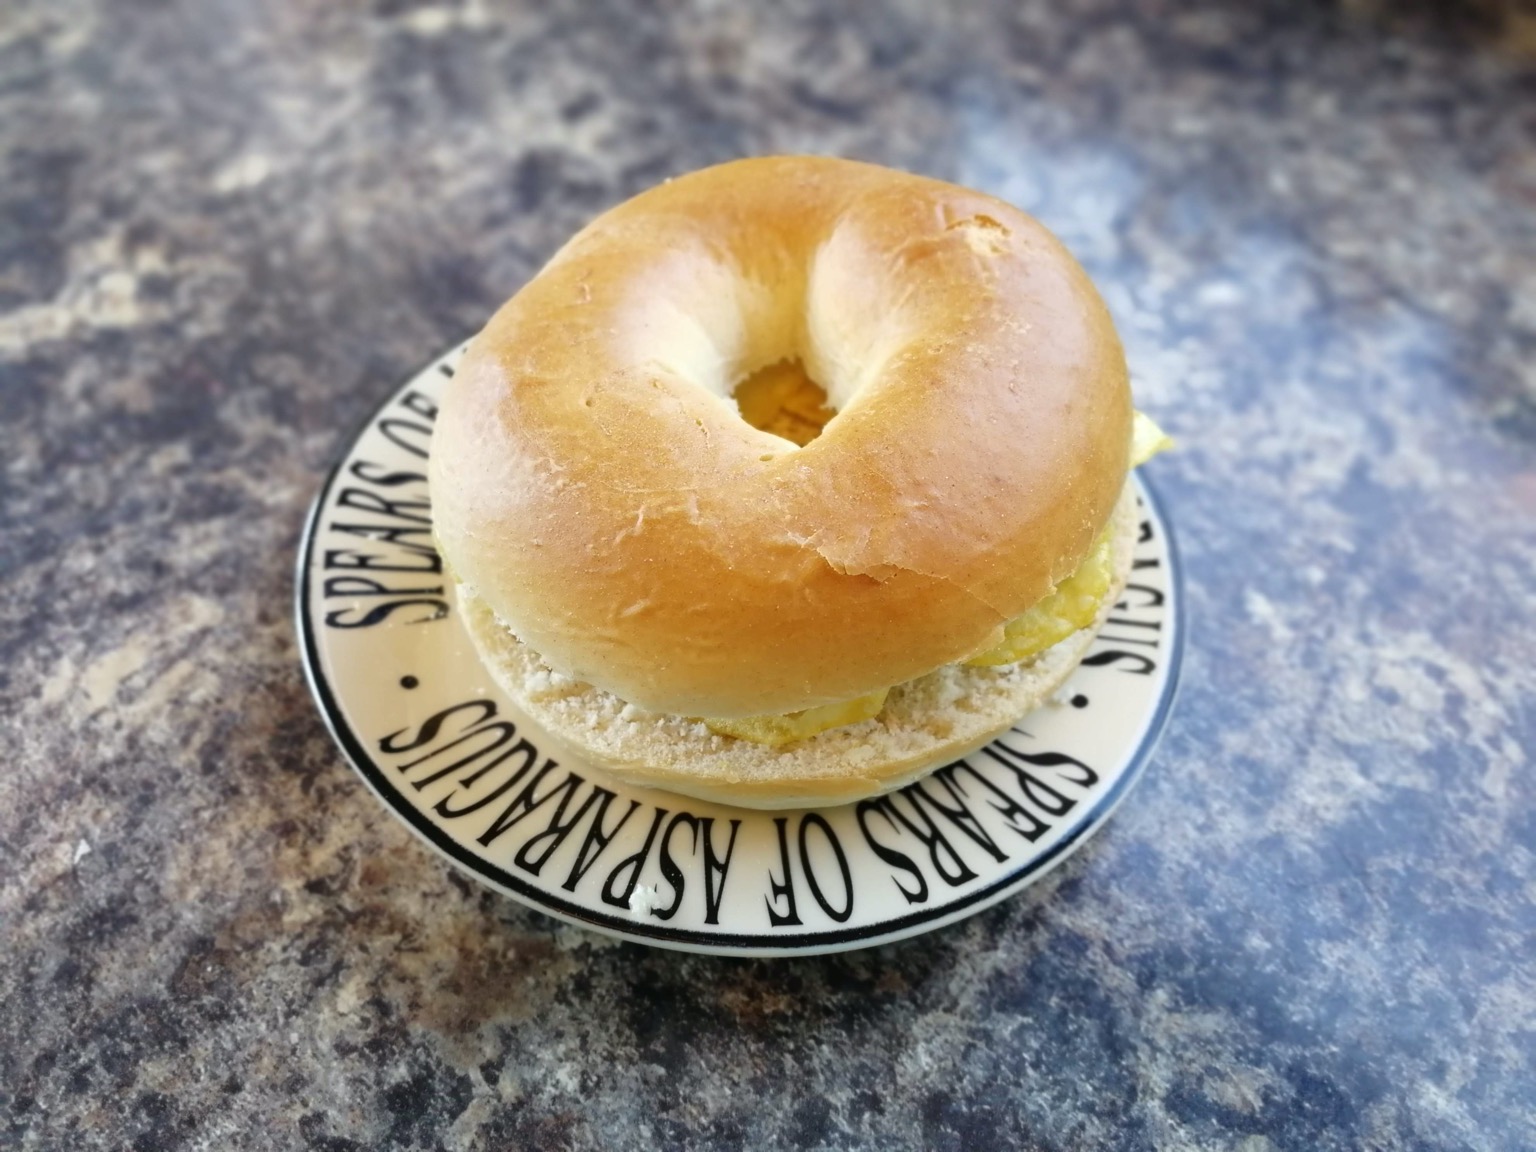 Crisp-filled bagel on a typographic plate